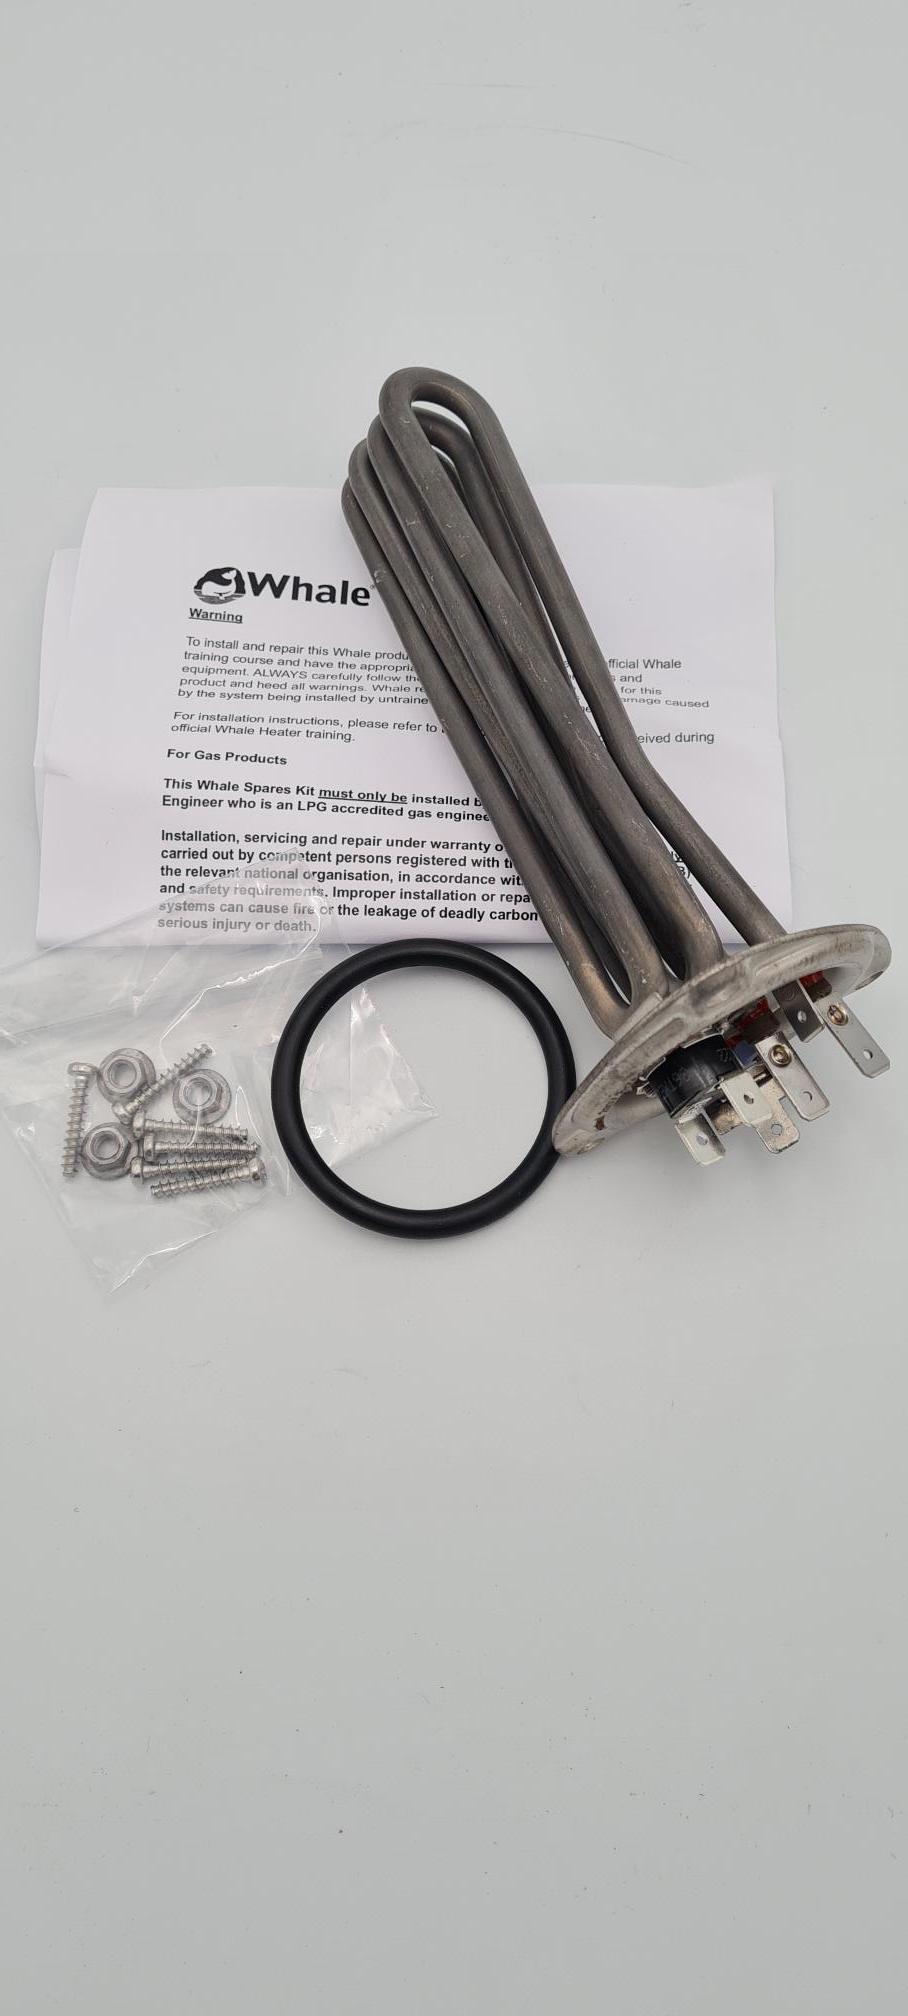 Whale Water Heater Expanse Electric Element - 1.5kW - AK1280